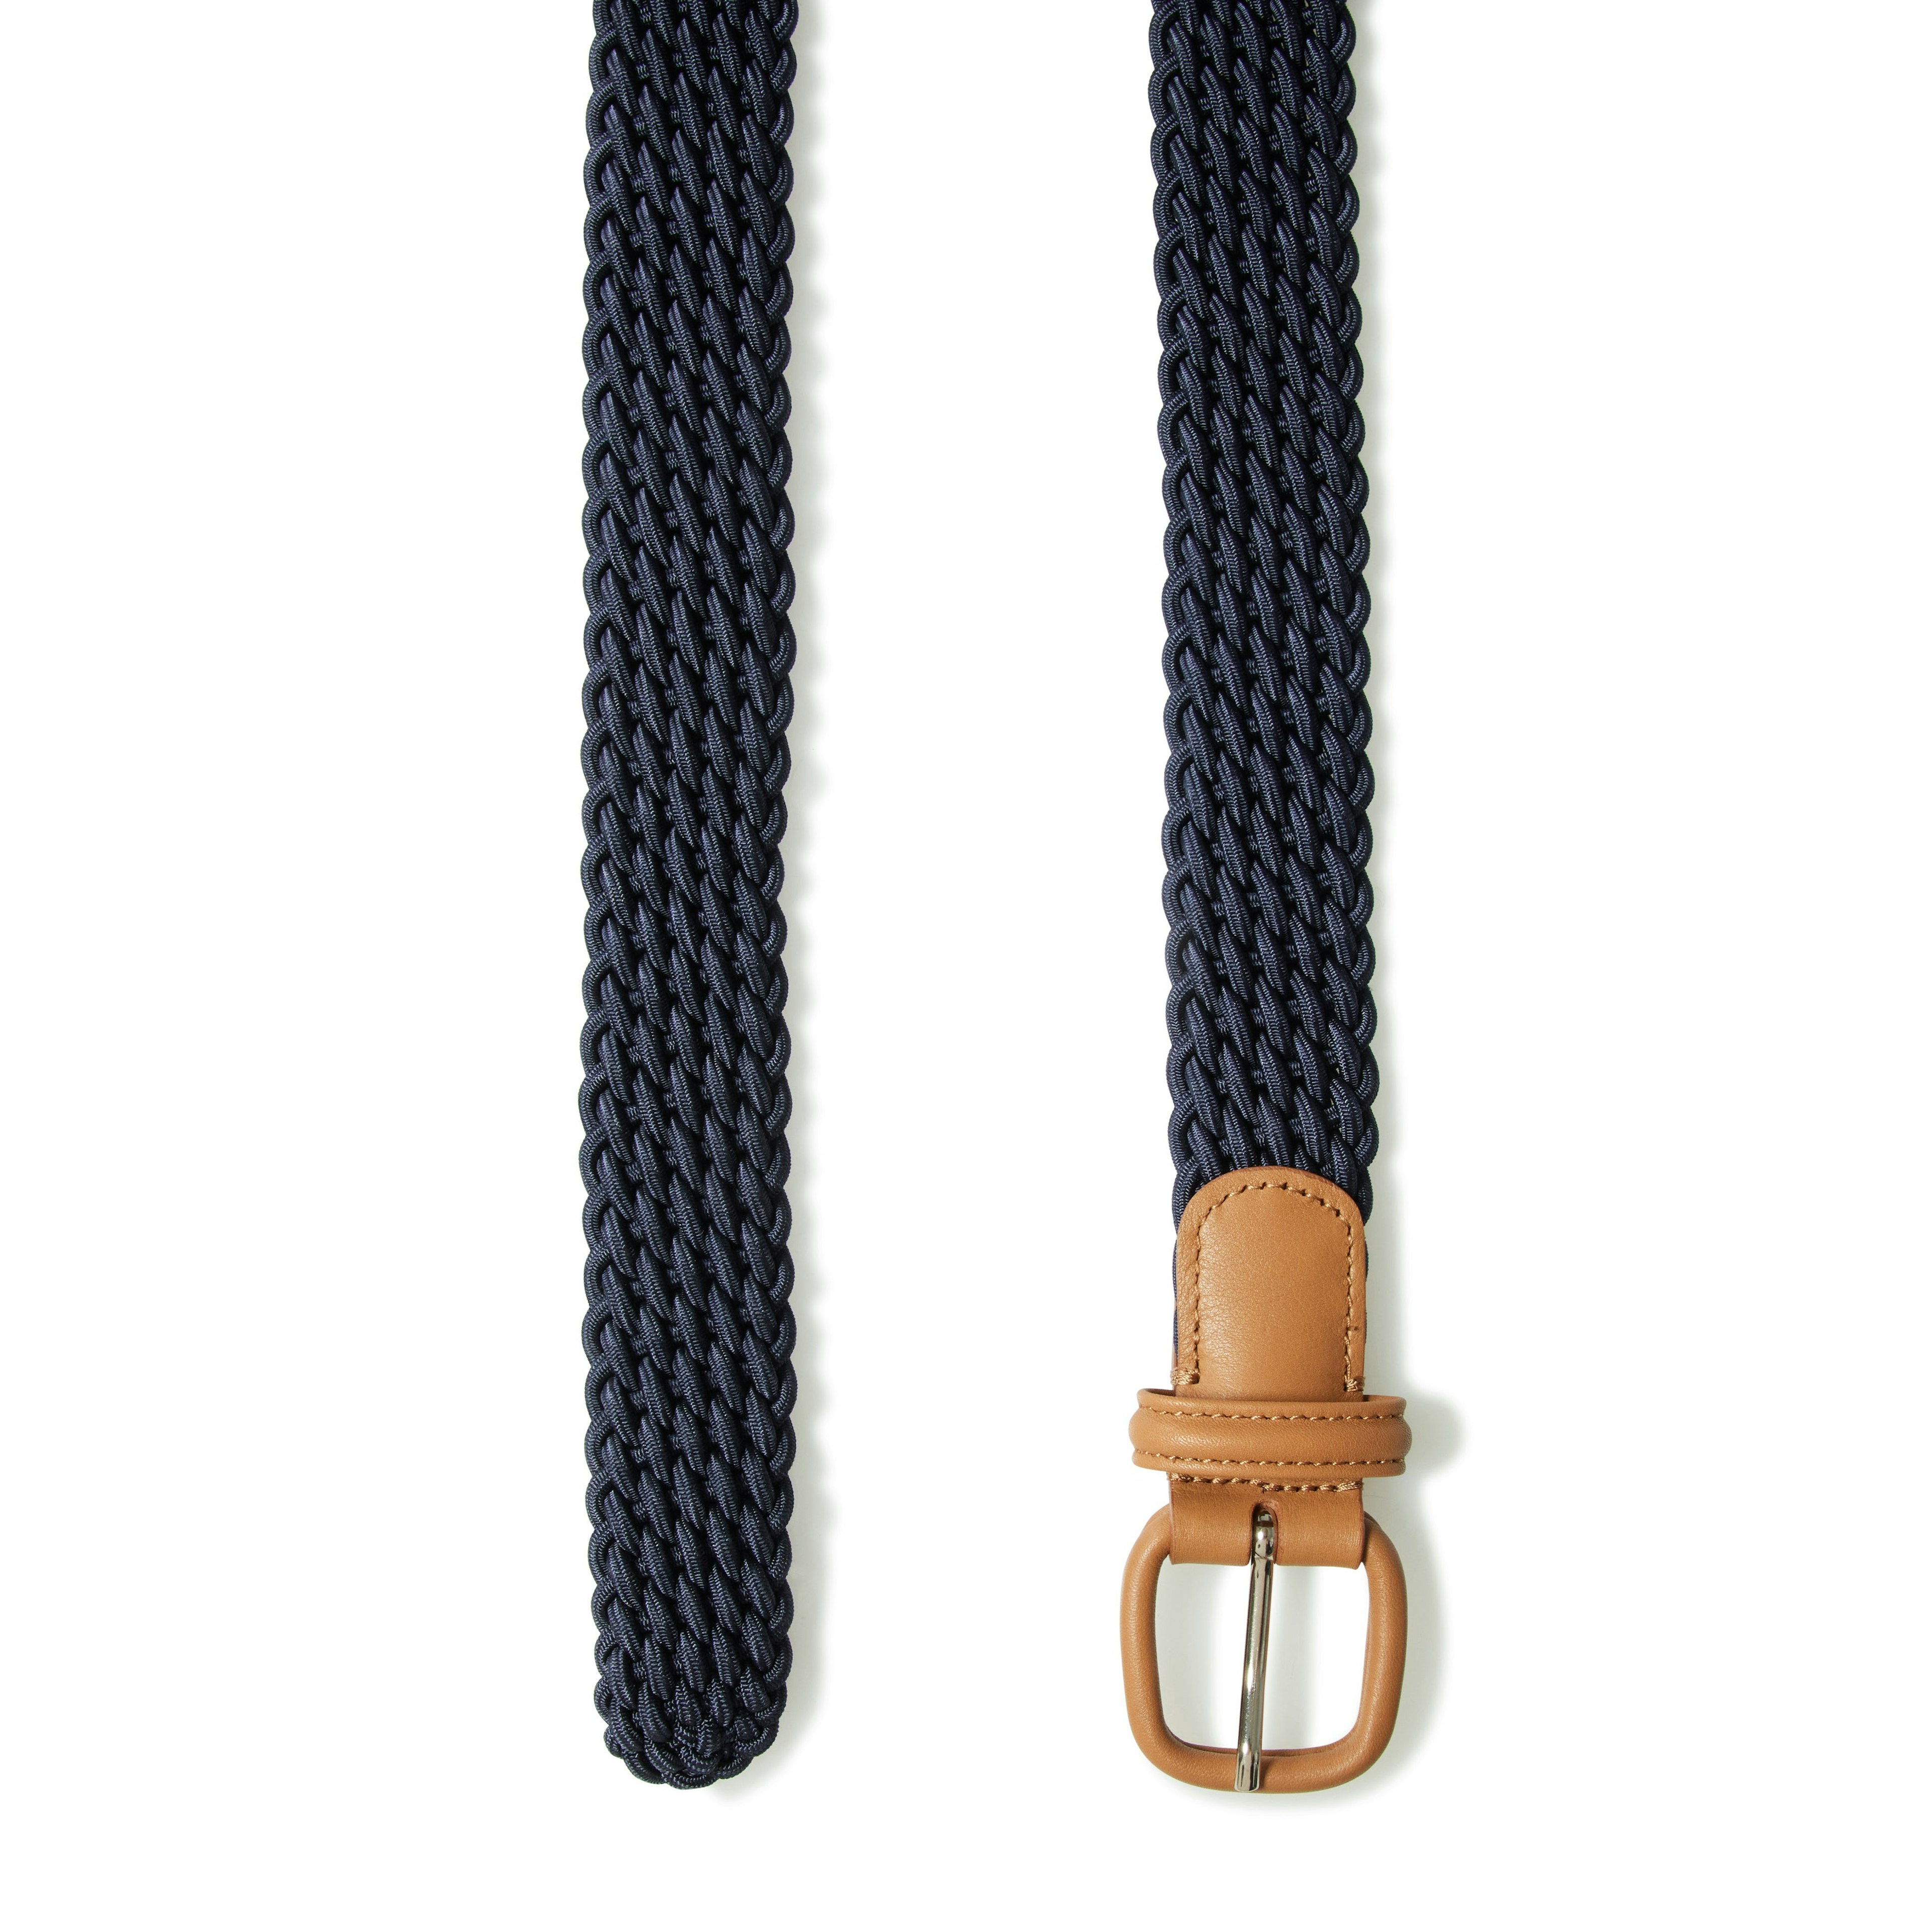 Woven Belt with Leather Covered Buckle - The Armoury